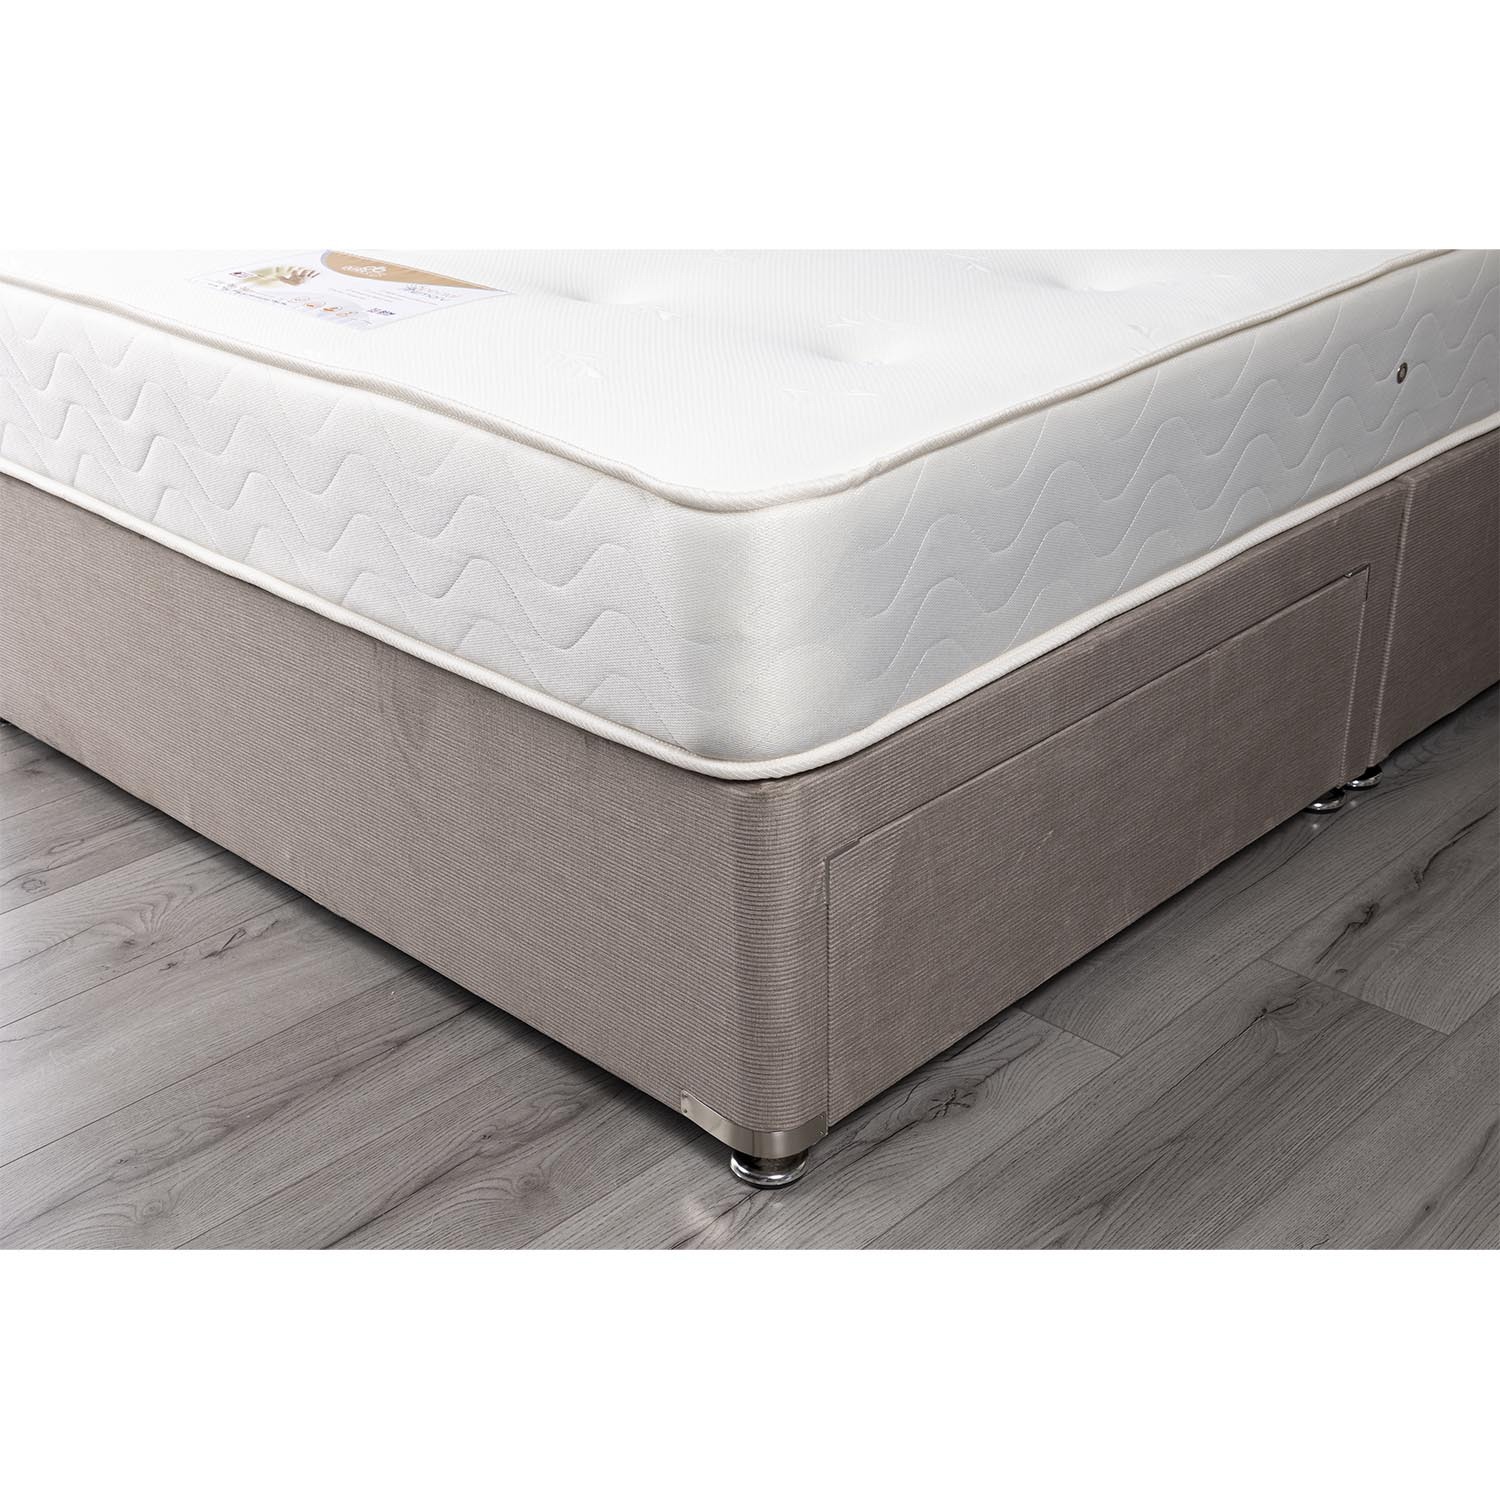 Dura Beds Single White Special Memory Mattress Image 3